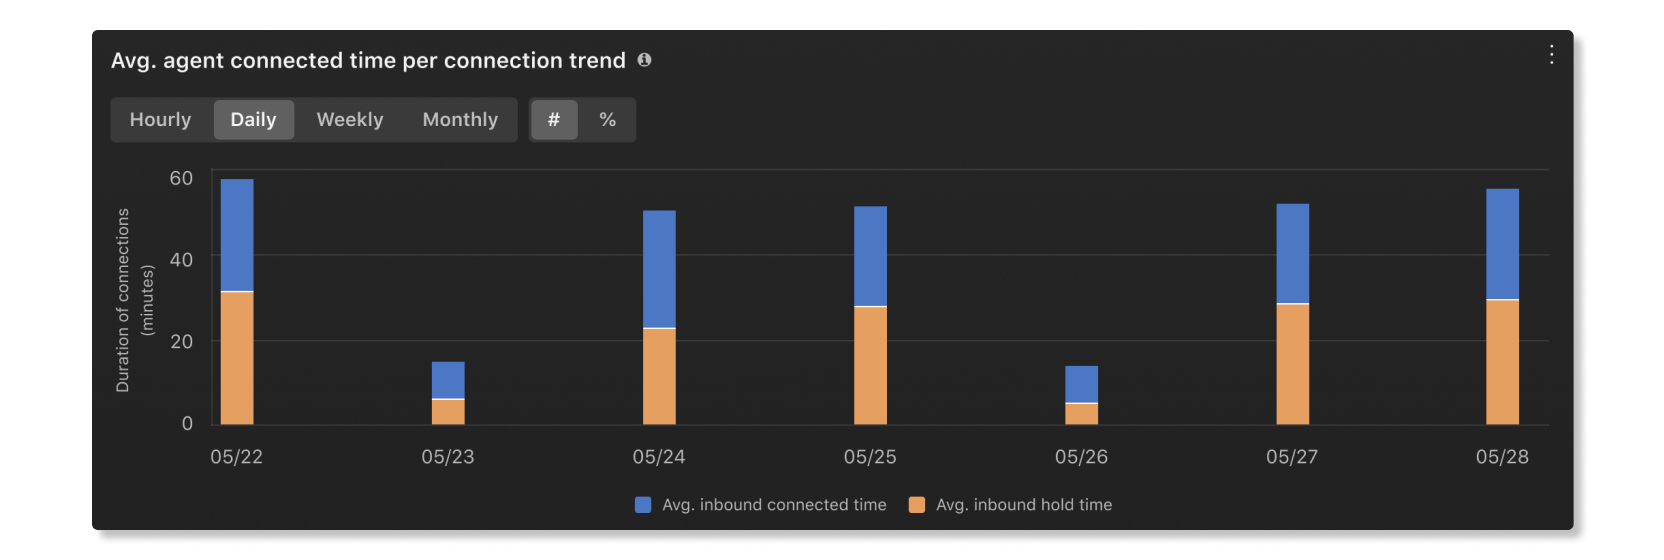 Avg. agent connected time per connection trend chart in Agent statistics of Customer Essentials analytics